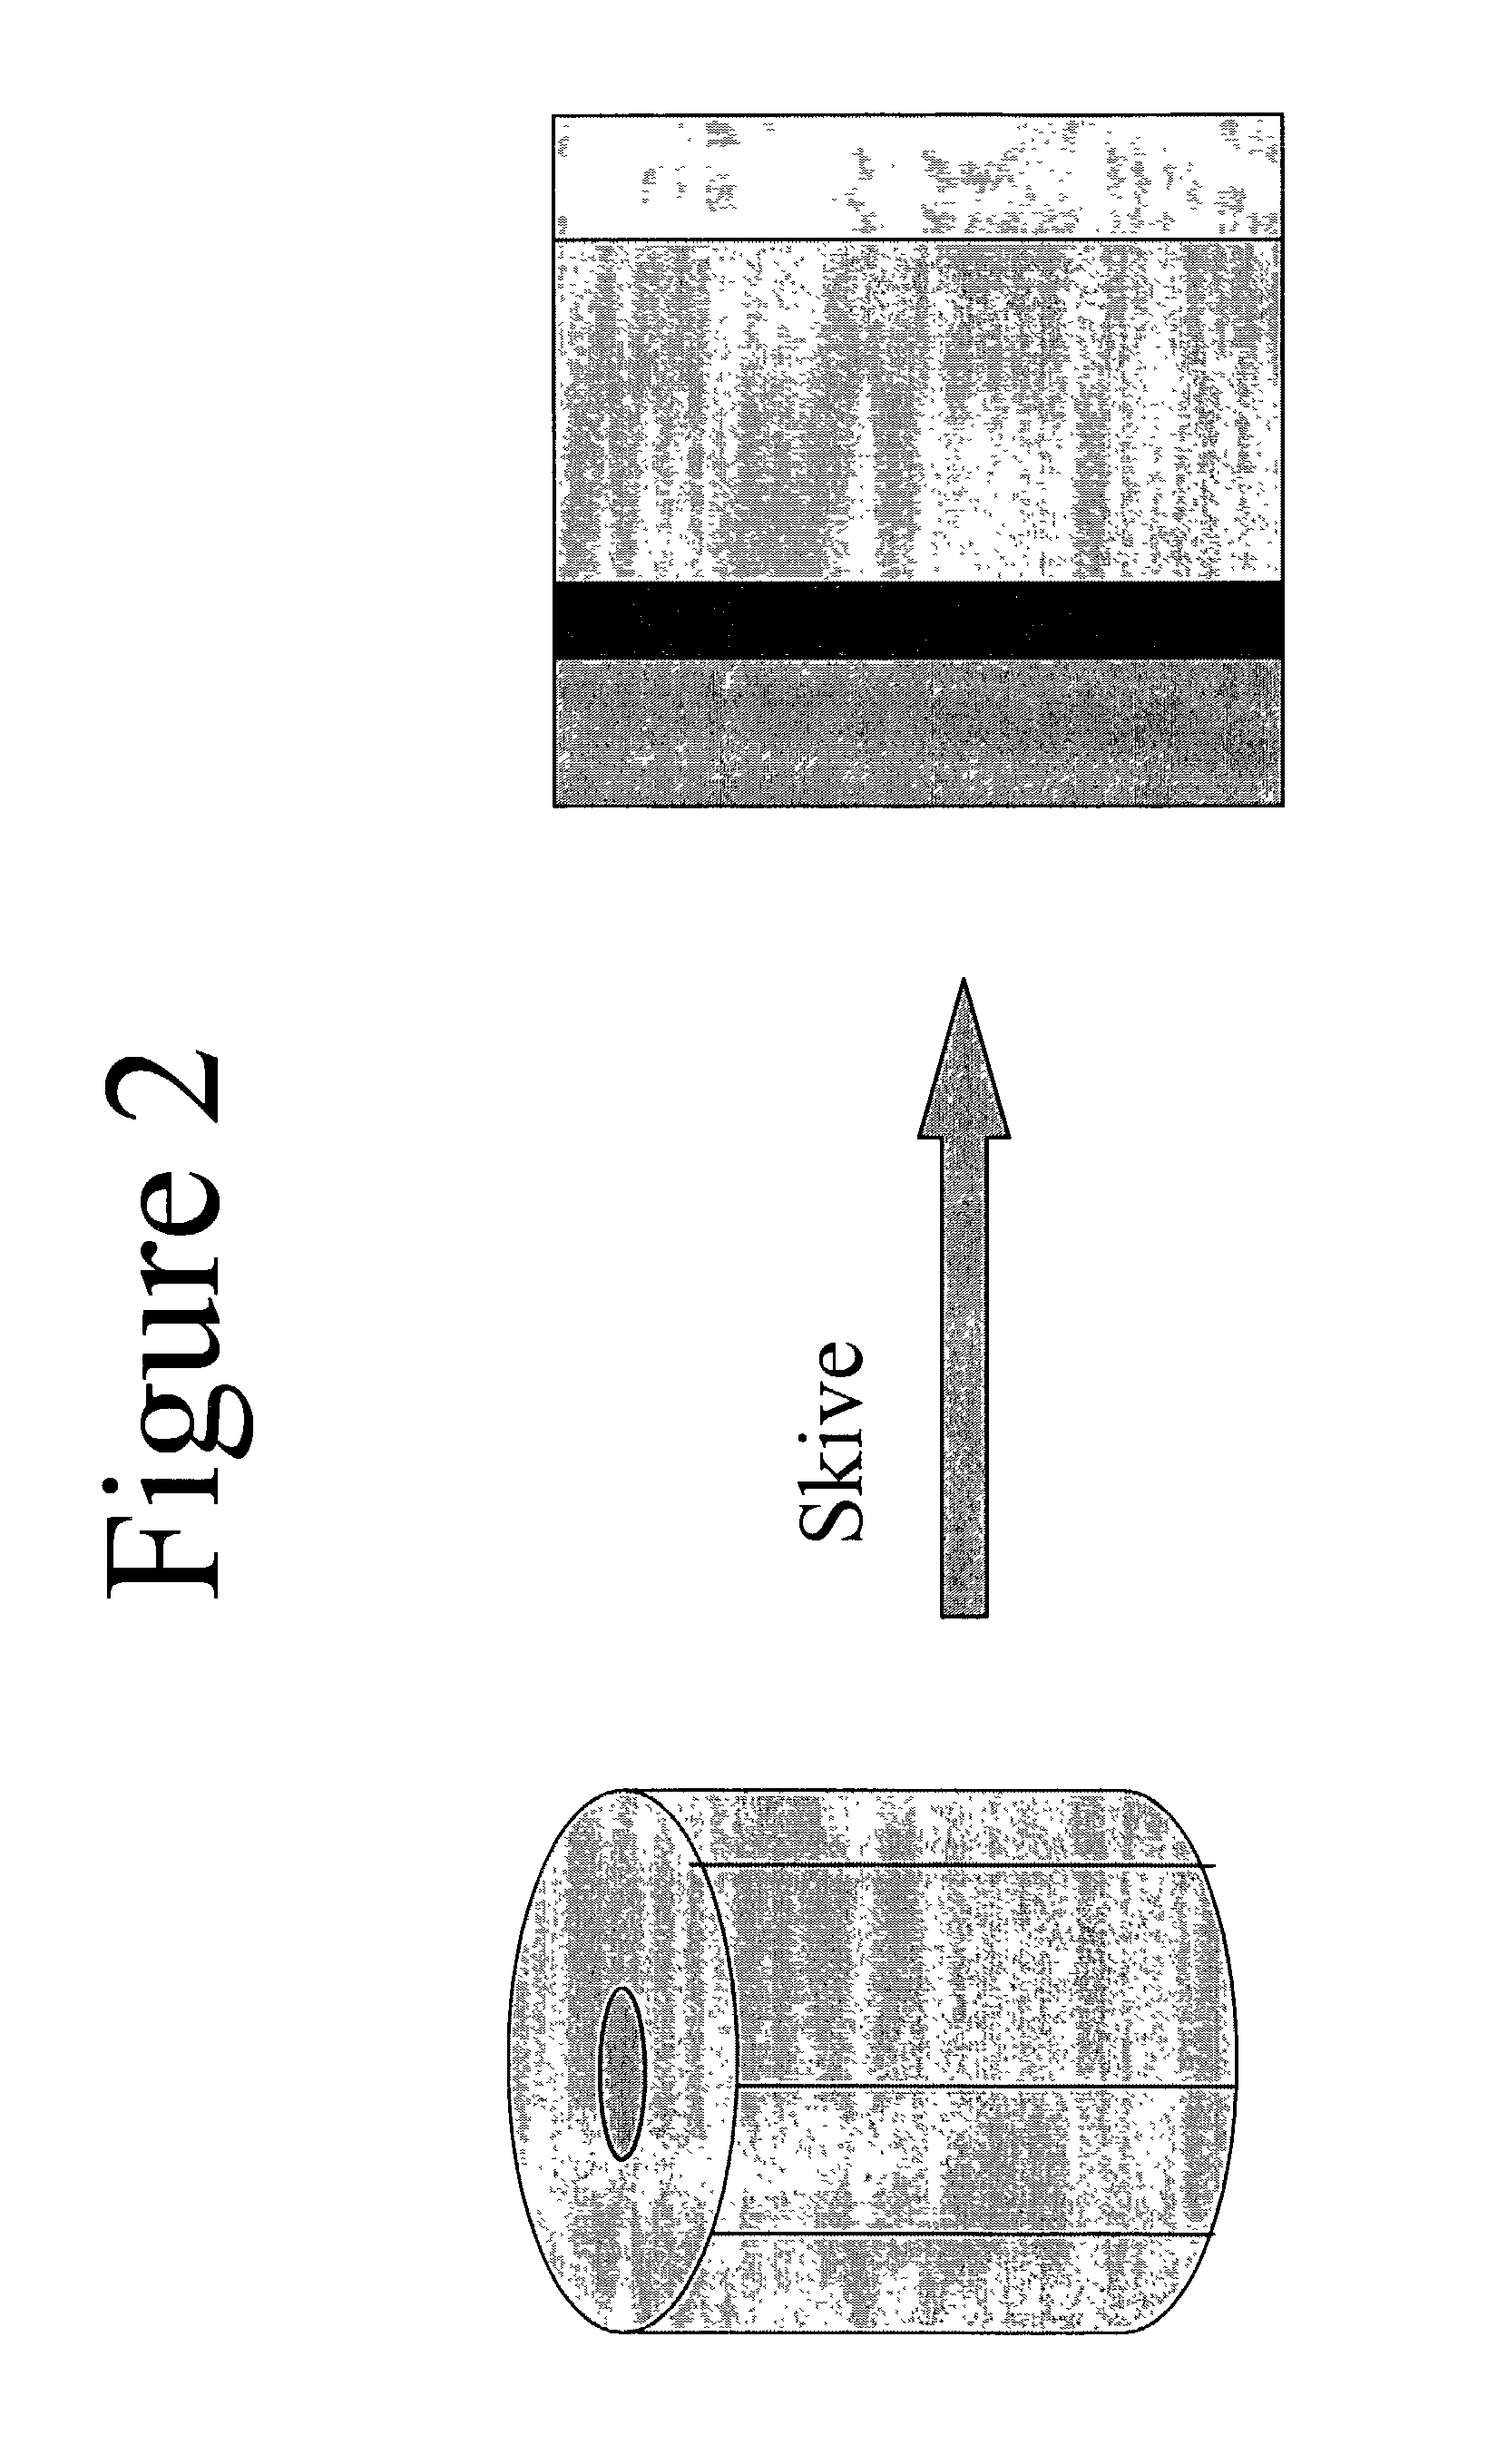 Discrete hydrophilic-hydrophobic porous materials and methods for making the same